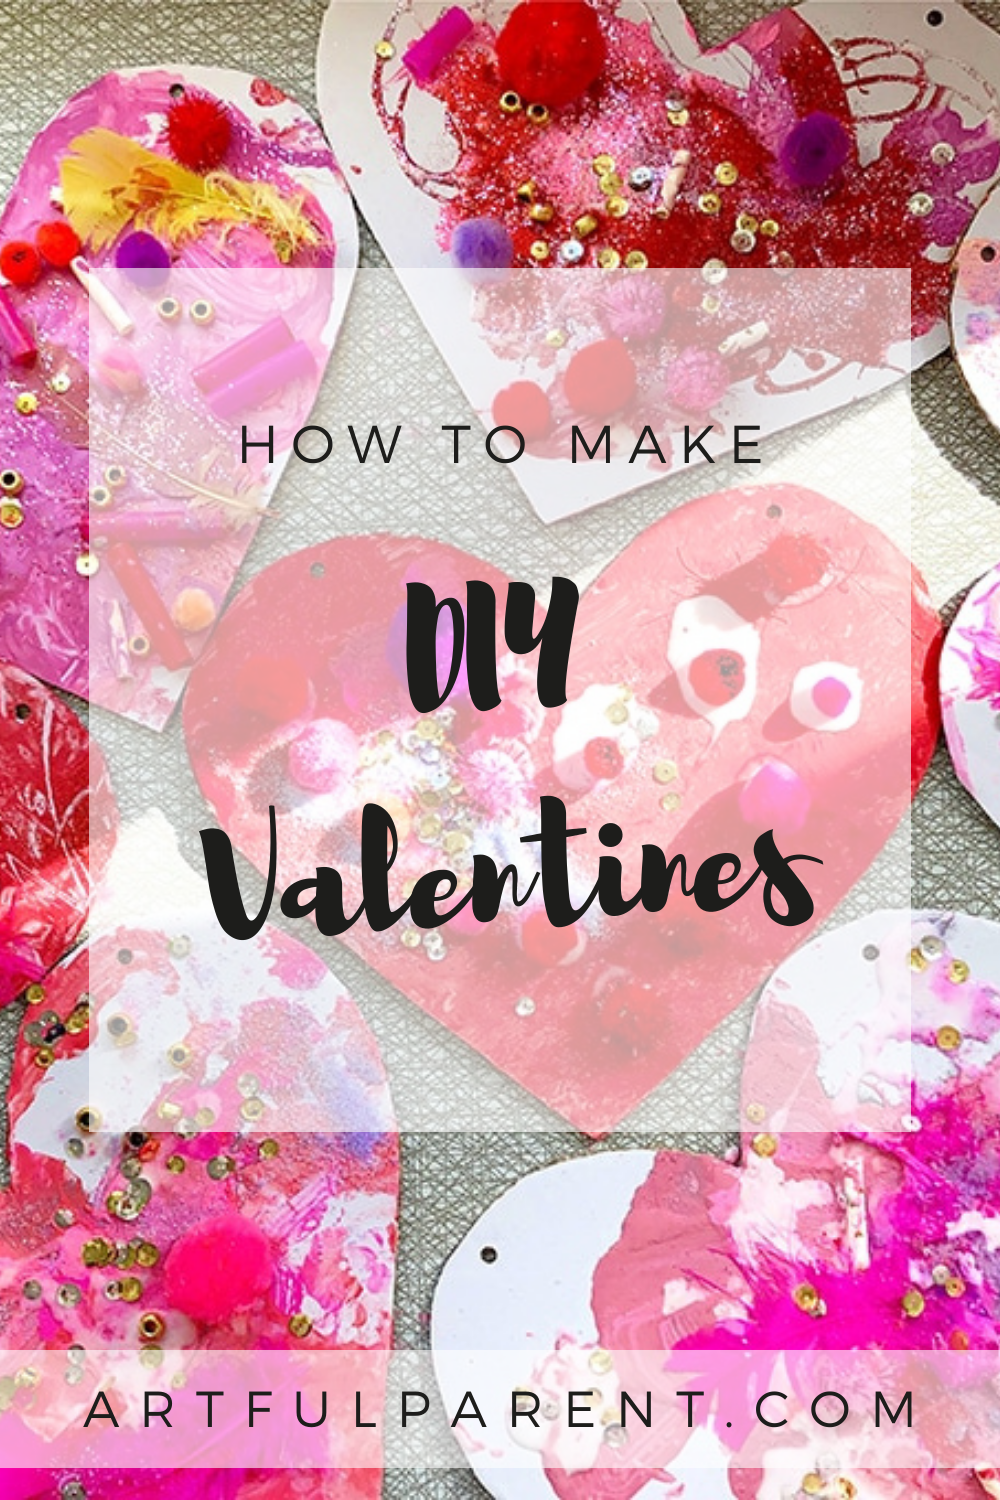 How to Make DIY Valentines for Kids